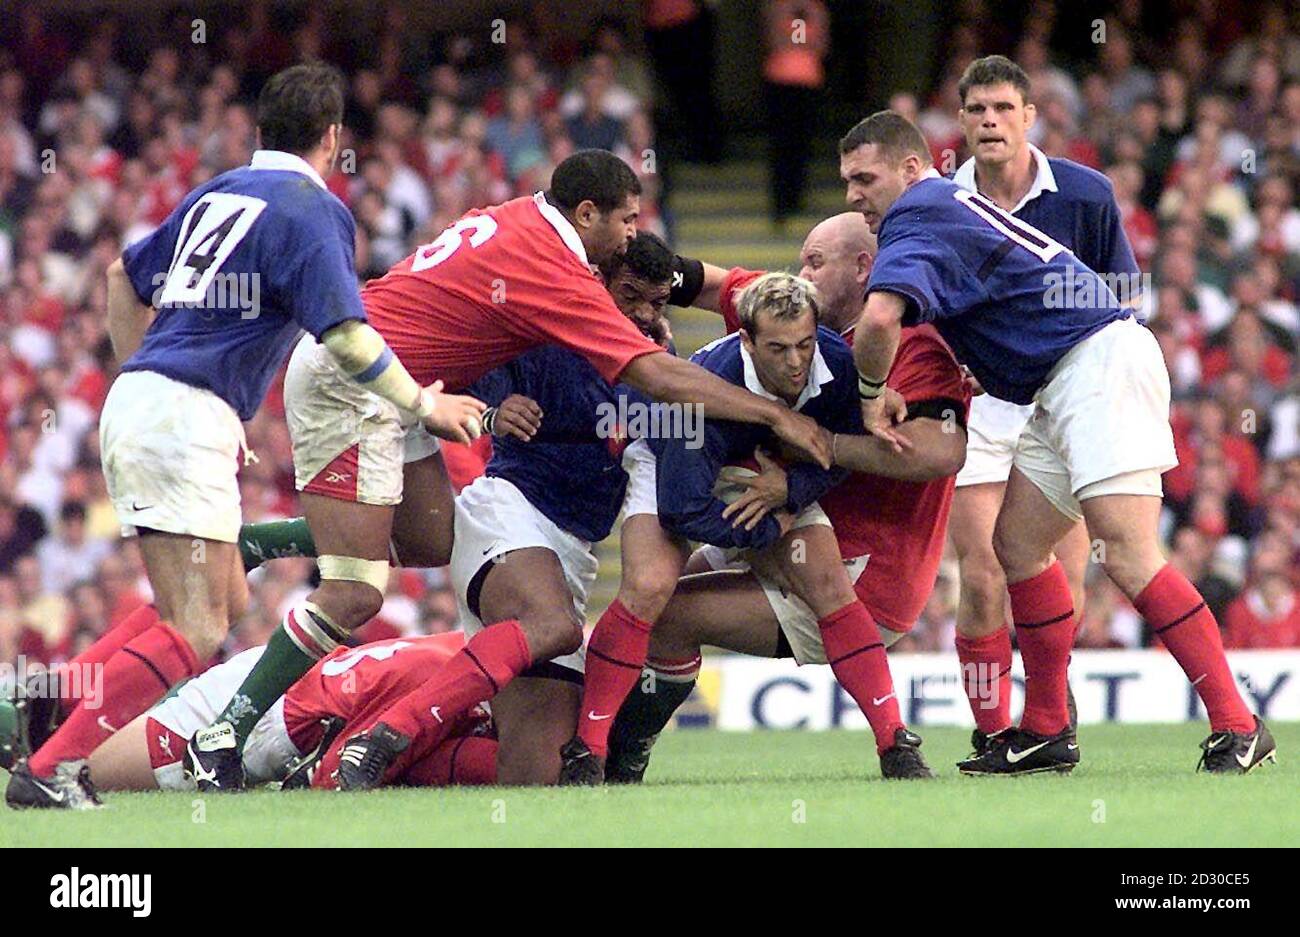 Wales's defence in the shape of Colin Charvis (no 6) and Craig Quinnell tie up France's Thomas Castaignede during final World Cup warm up match before the start of the competition on October 1st. Wales won the match 34-23.  Stock Photo